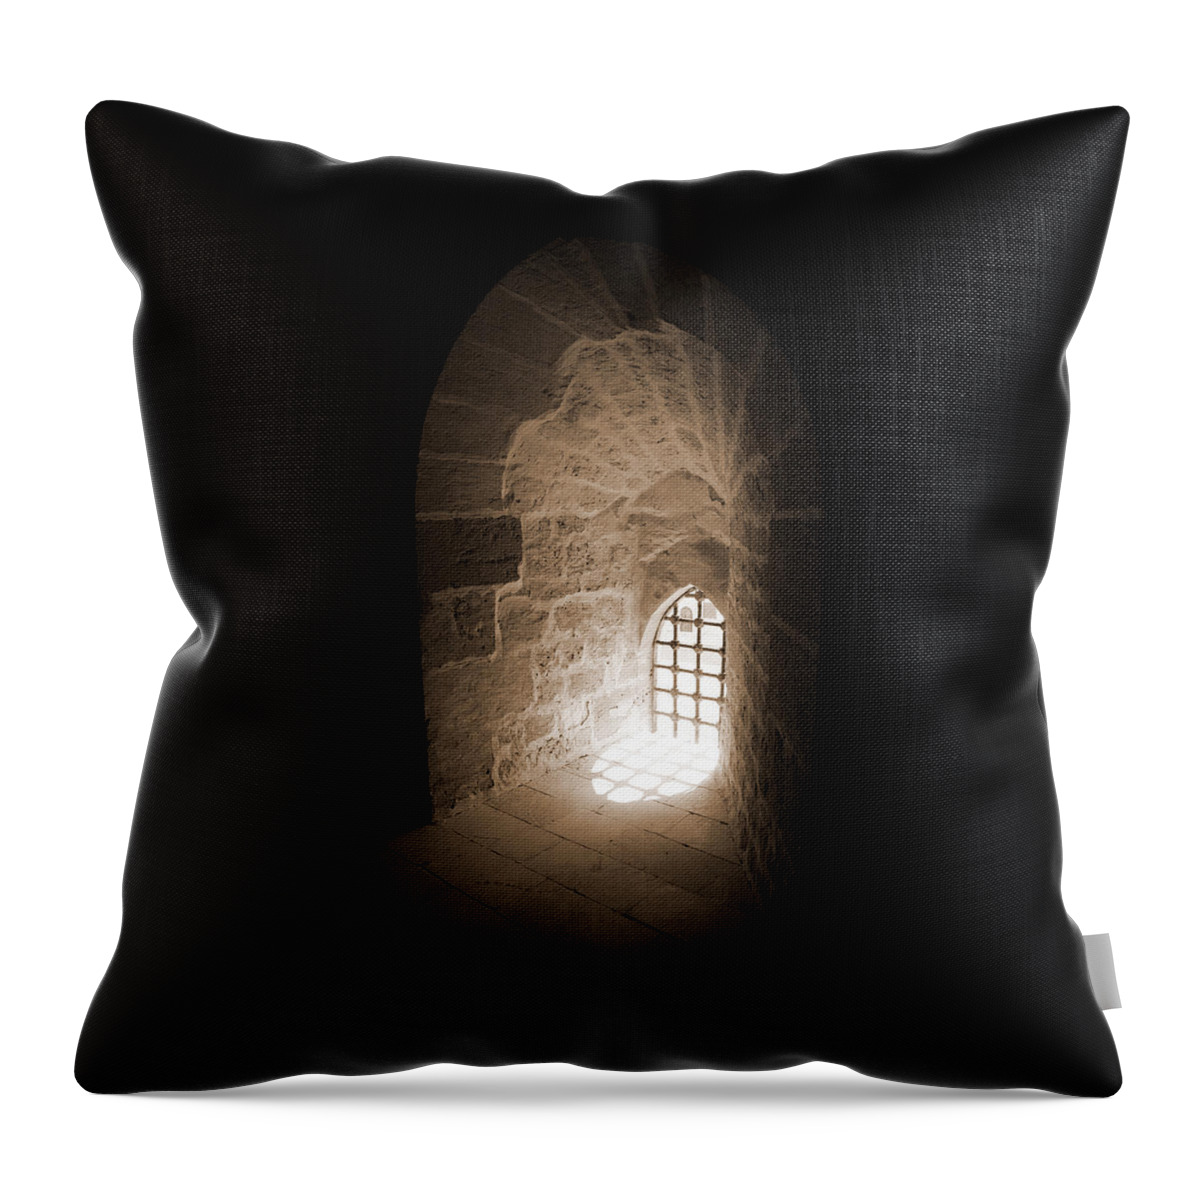 Sepia Throw Pillow featuring the photograph Tunneled Arch Window by Donna Corless